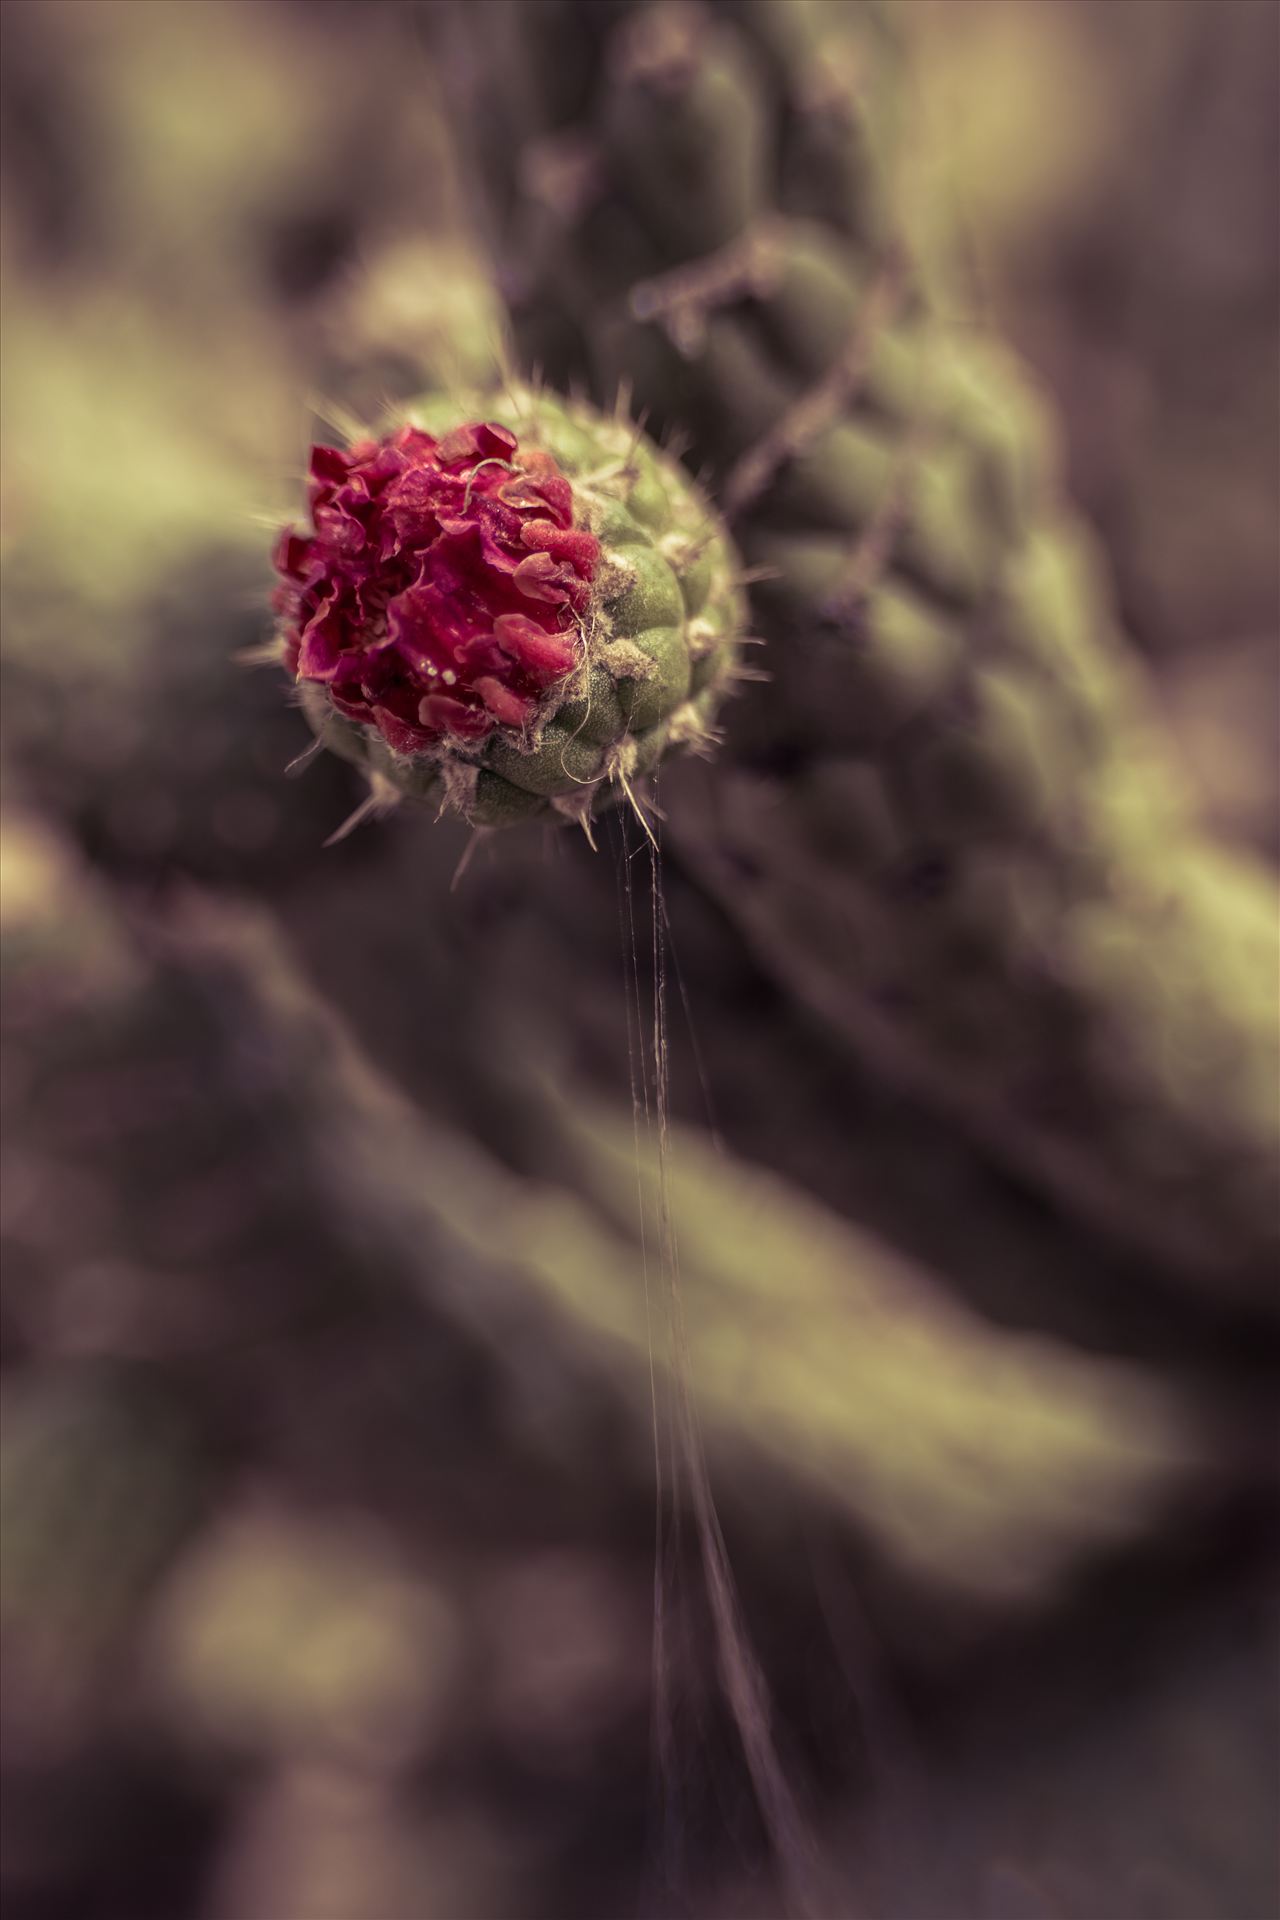 Cactus Flower.jpg - Red bloom on cactus in the sun by Sarah Williams